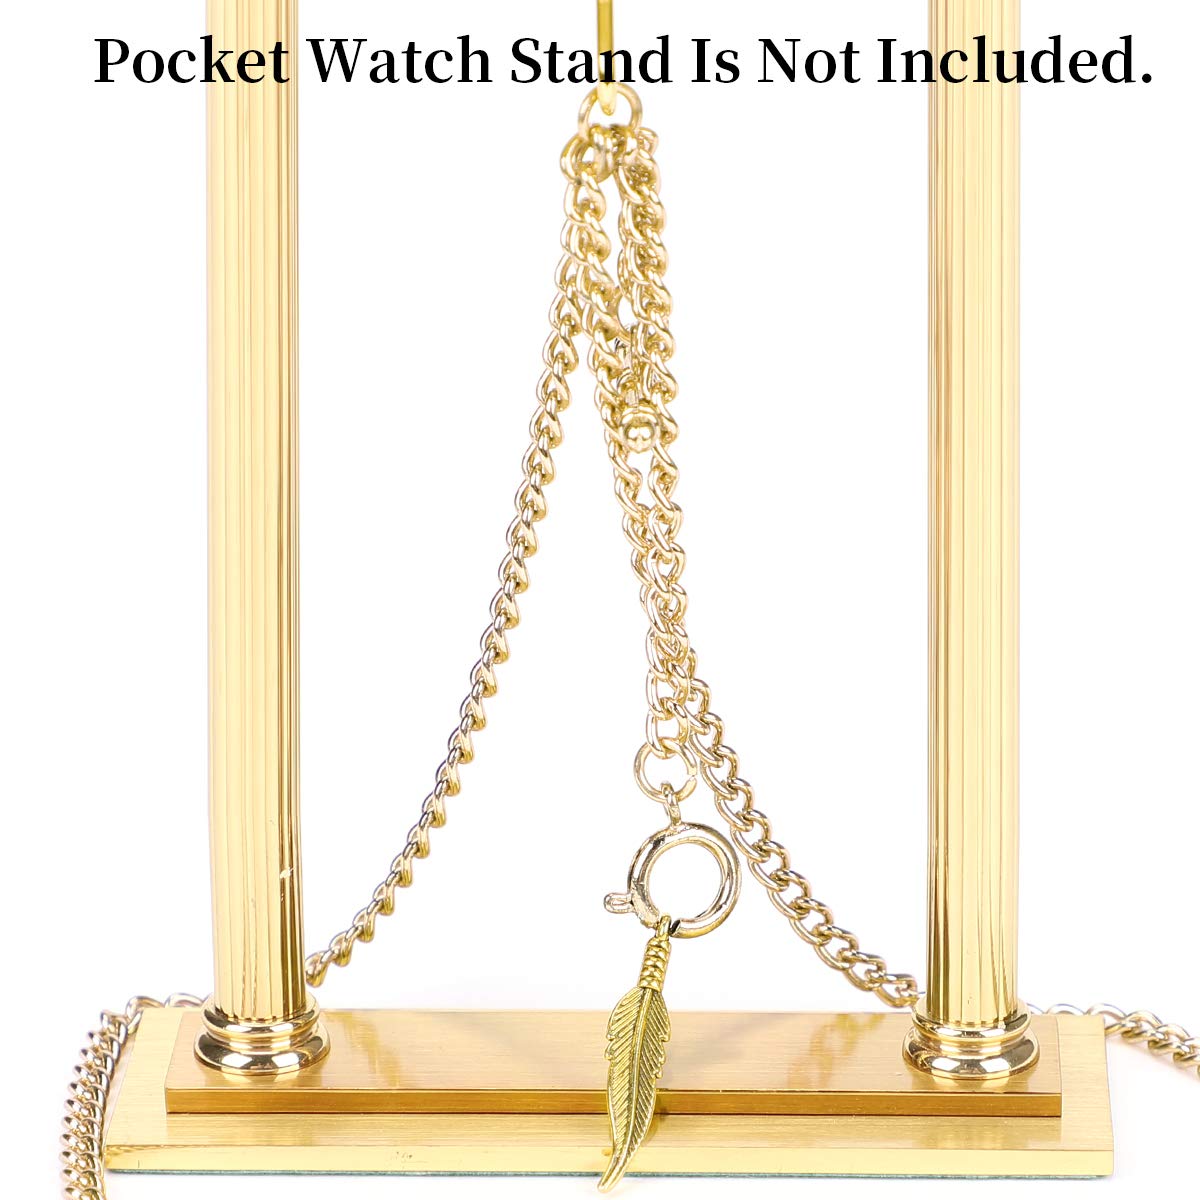 ManChDa Double Albert Chain Pocket Watch, Curb Link Chain 3 Hook Antique Plating Shield Design Fob T Bar for Men with Leaf